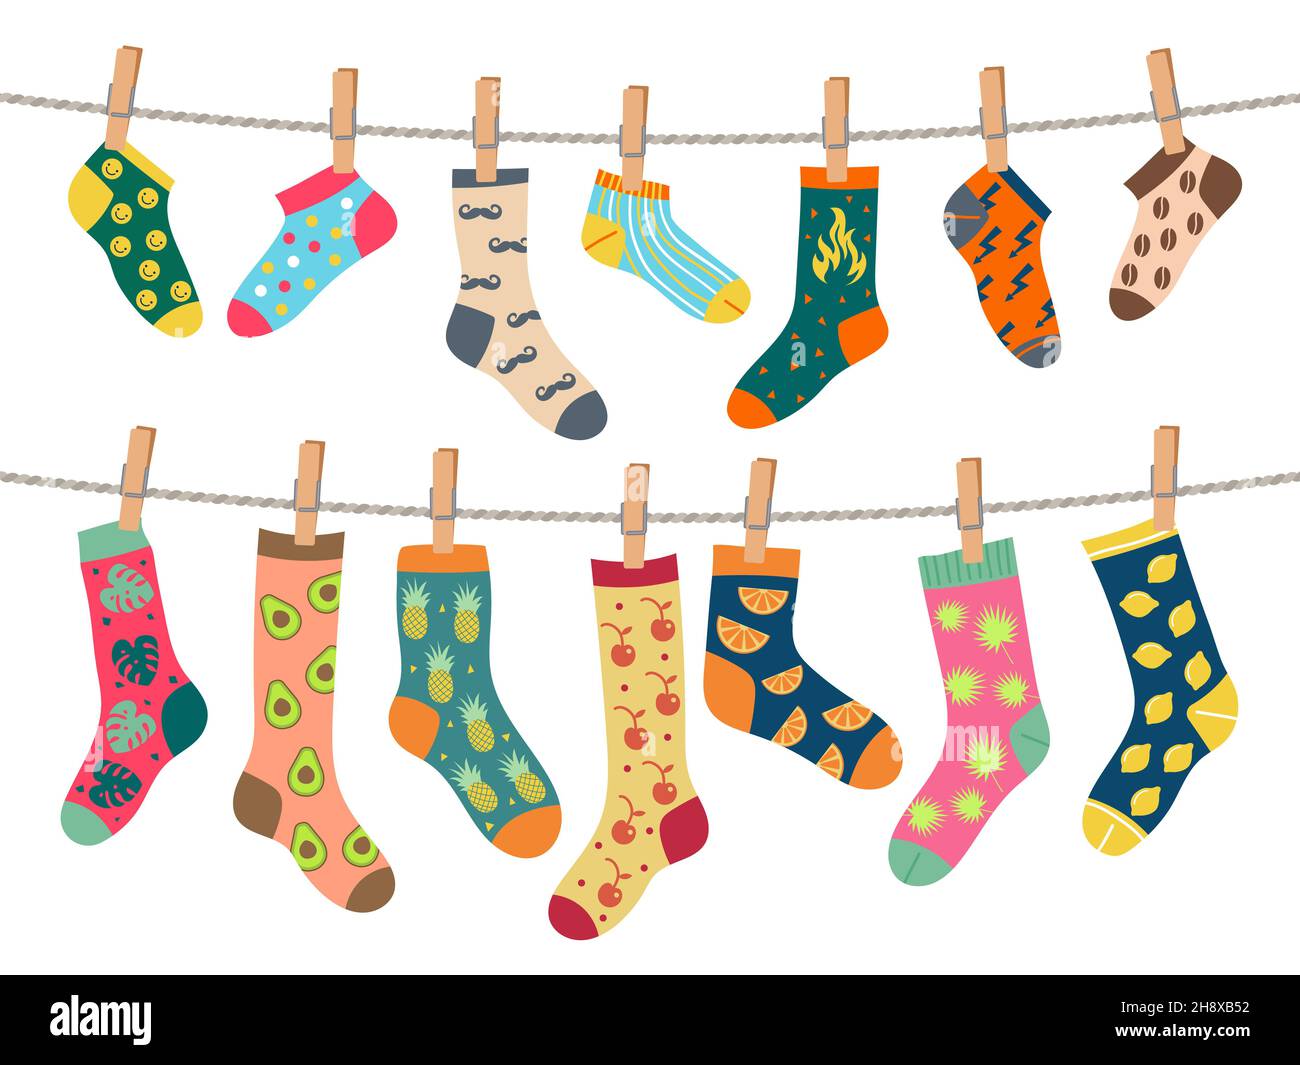 Funny patterns Stock Vector Images - Alamy